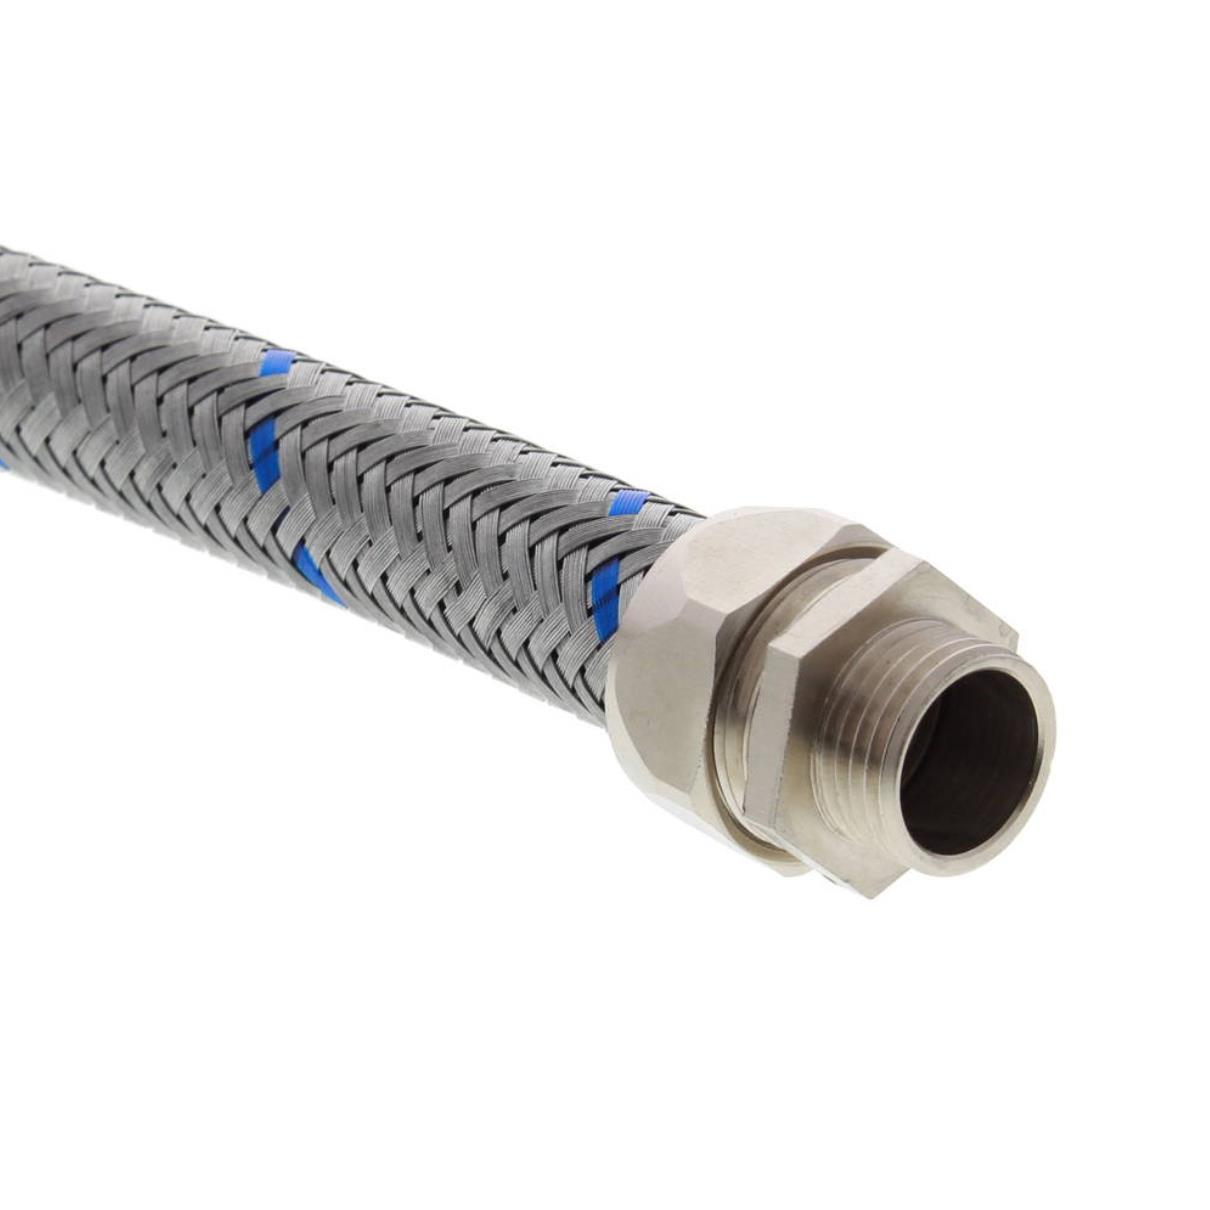 【BMCG-PVC-C-BG-21】T-CONNECTOR FOR CORRUGATED PIPES